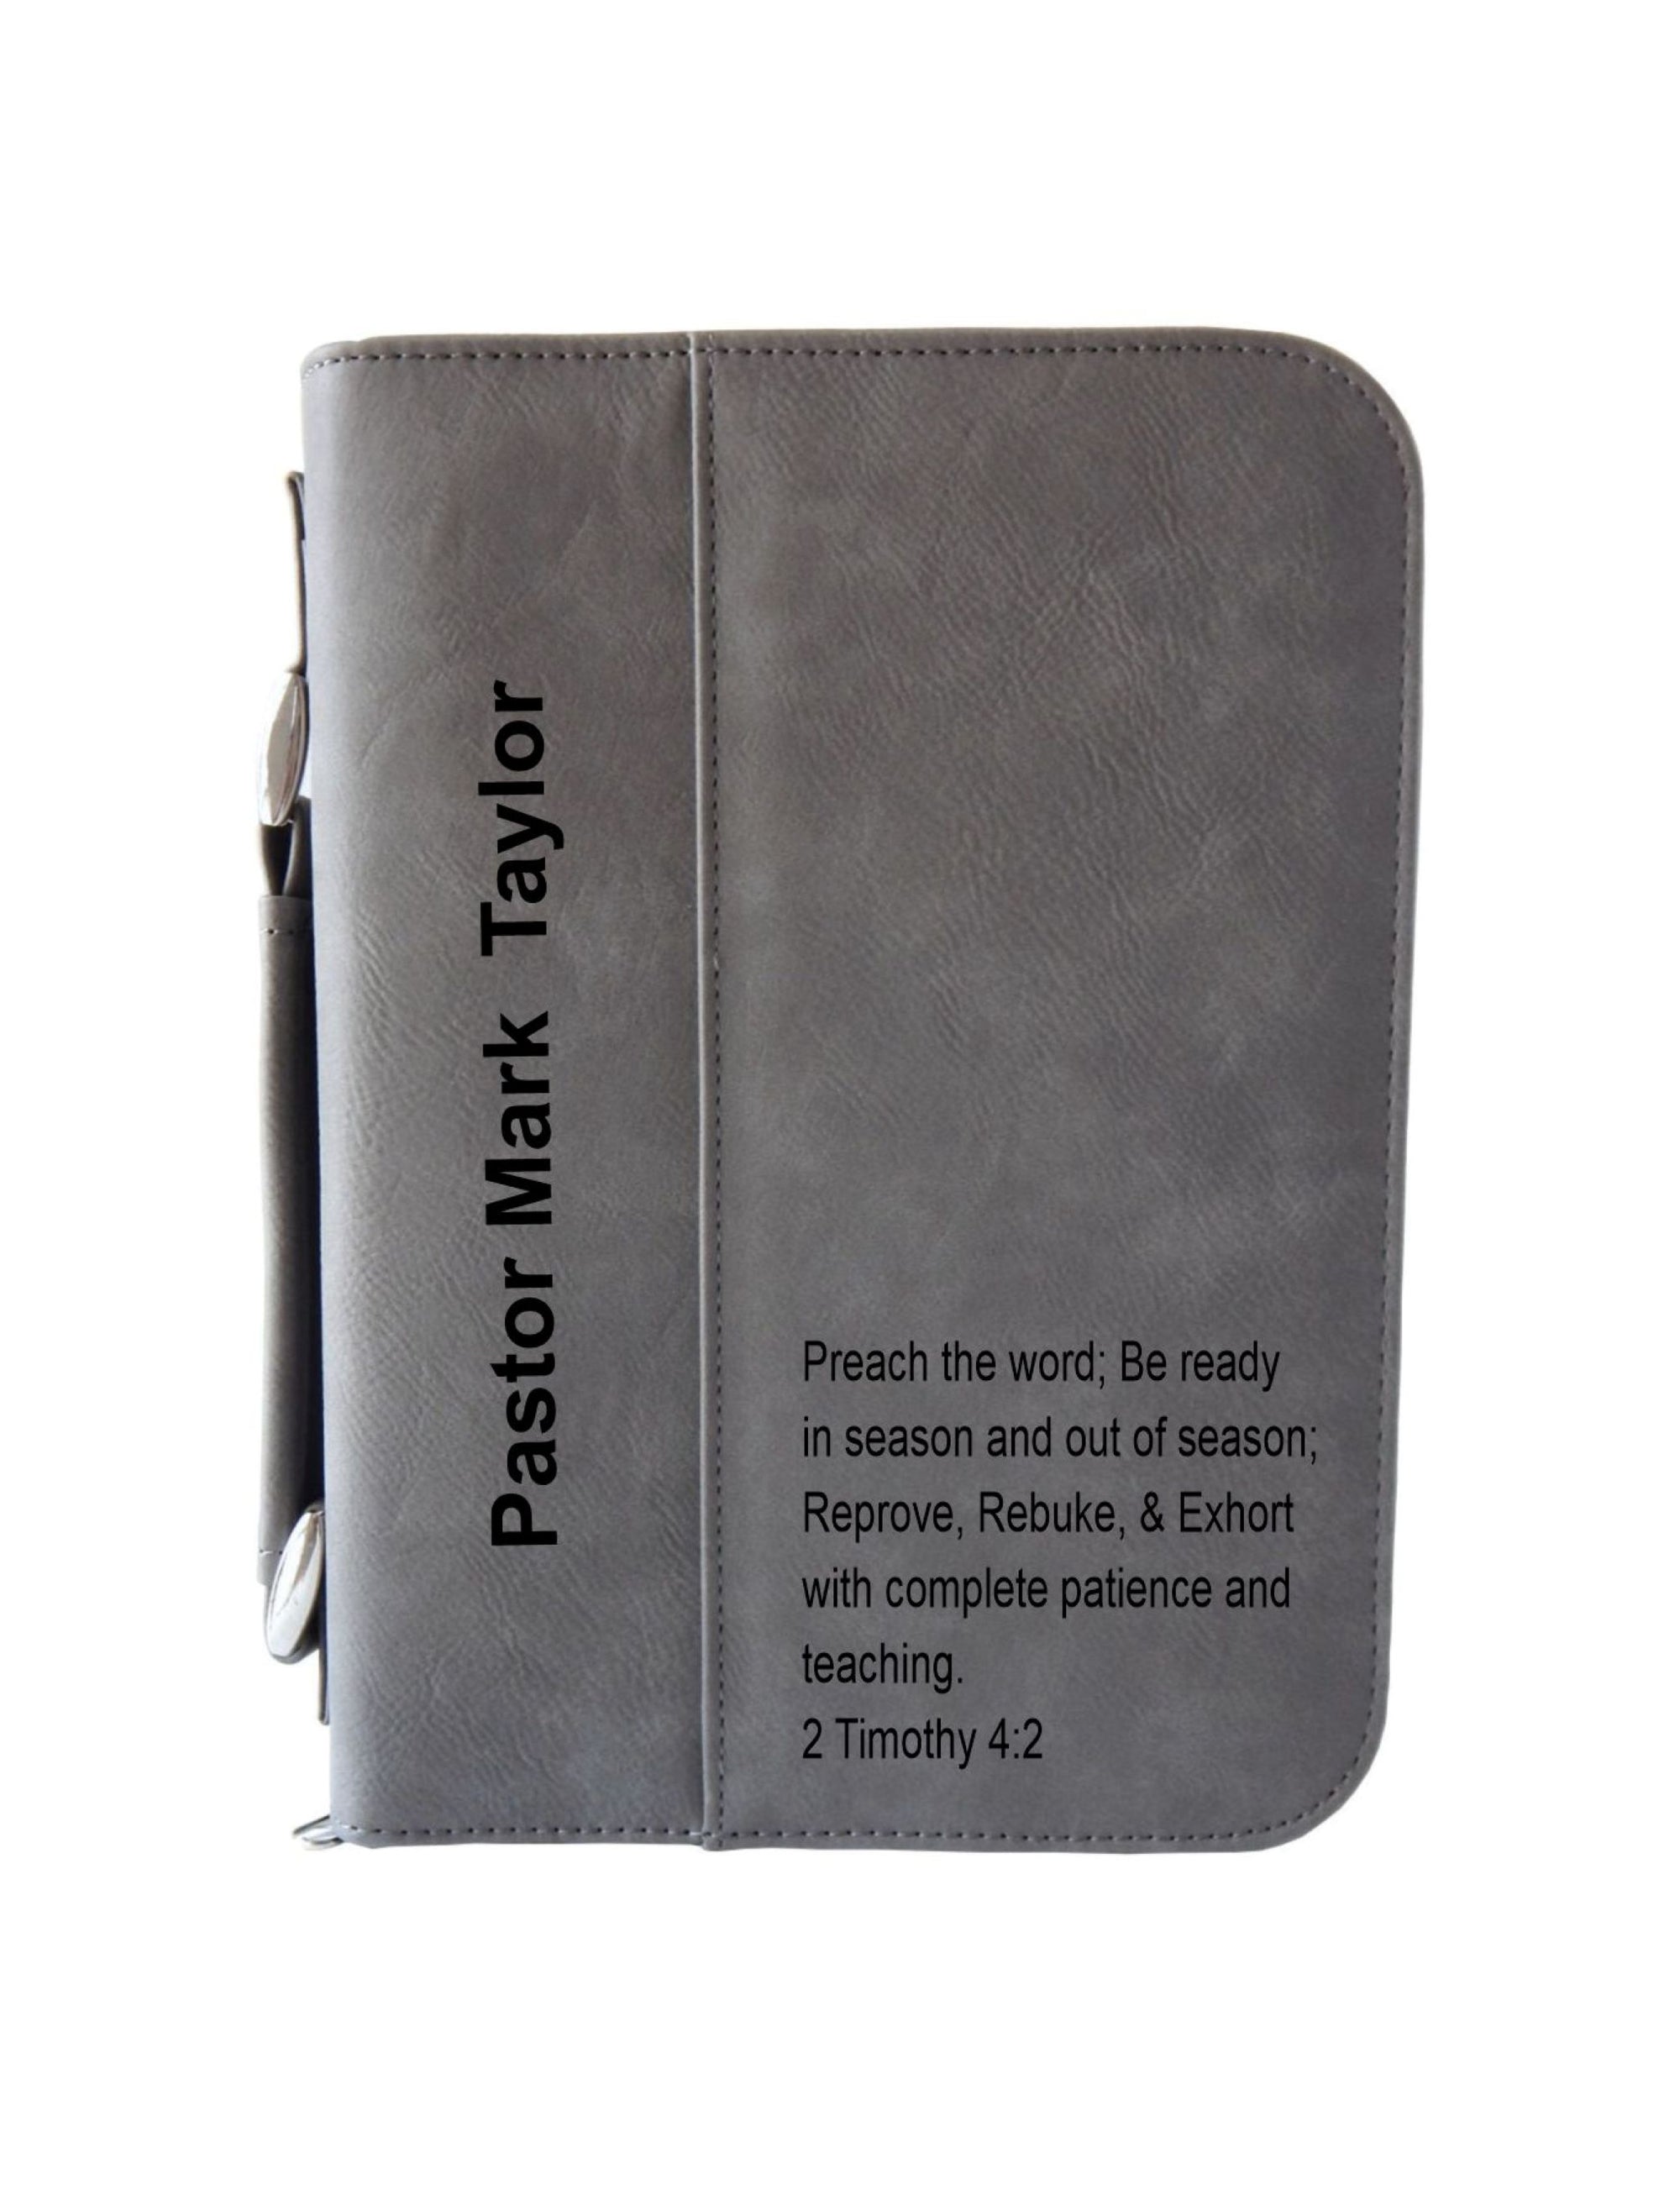 Preacher Minister Gift | Personalized Ordination Bible Case | Ministerial Servant gift, BCL047